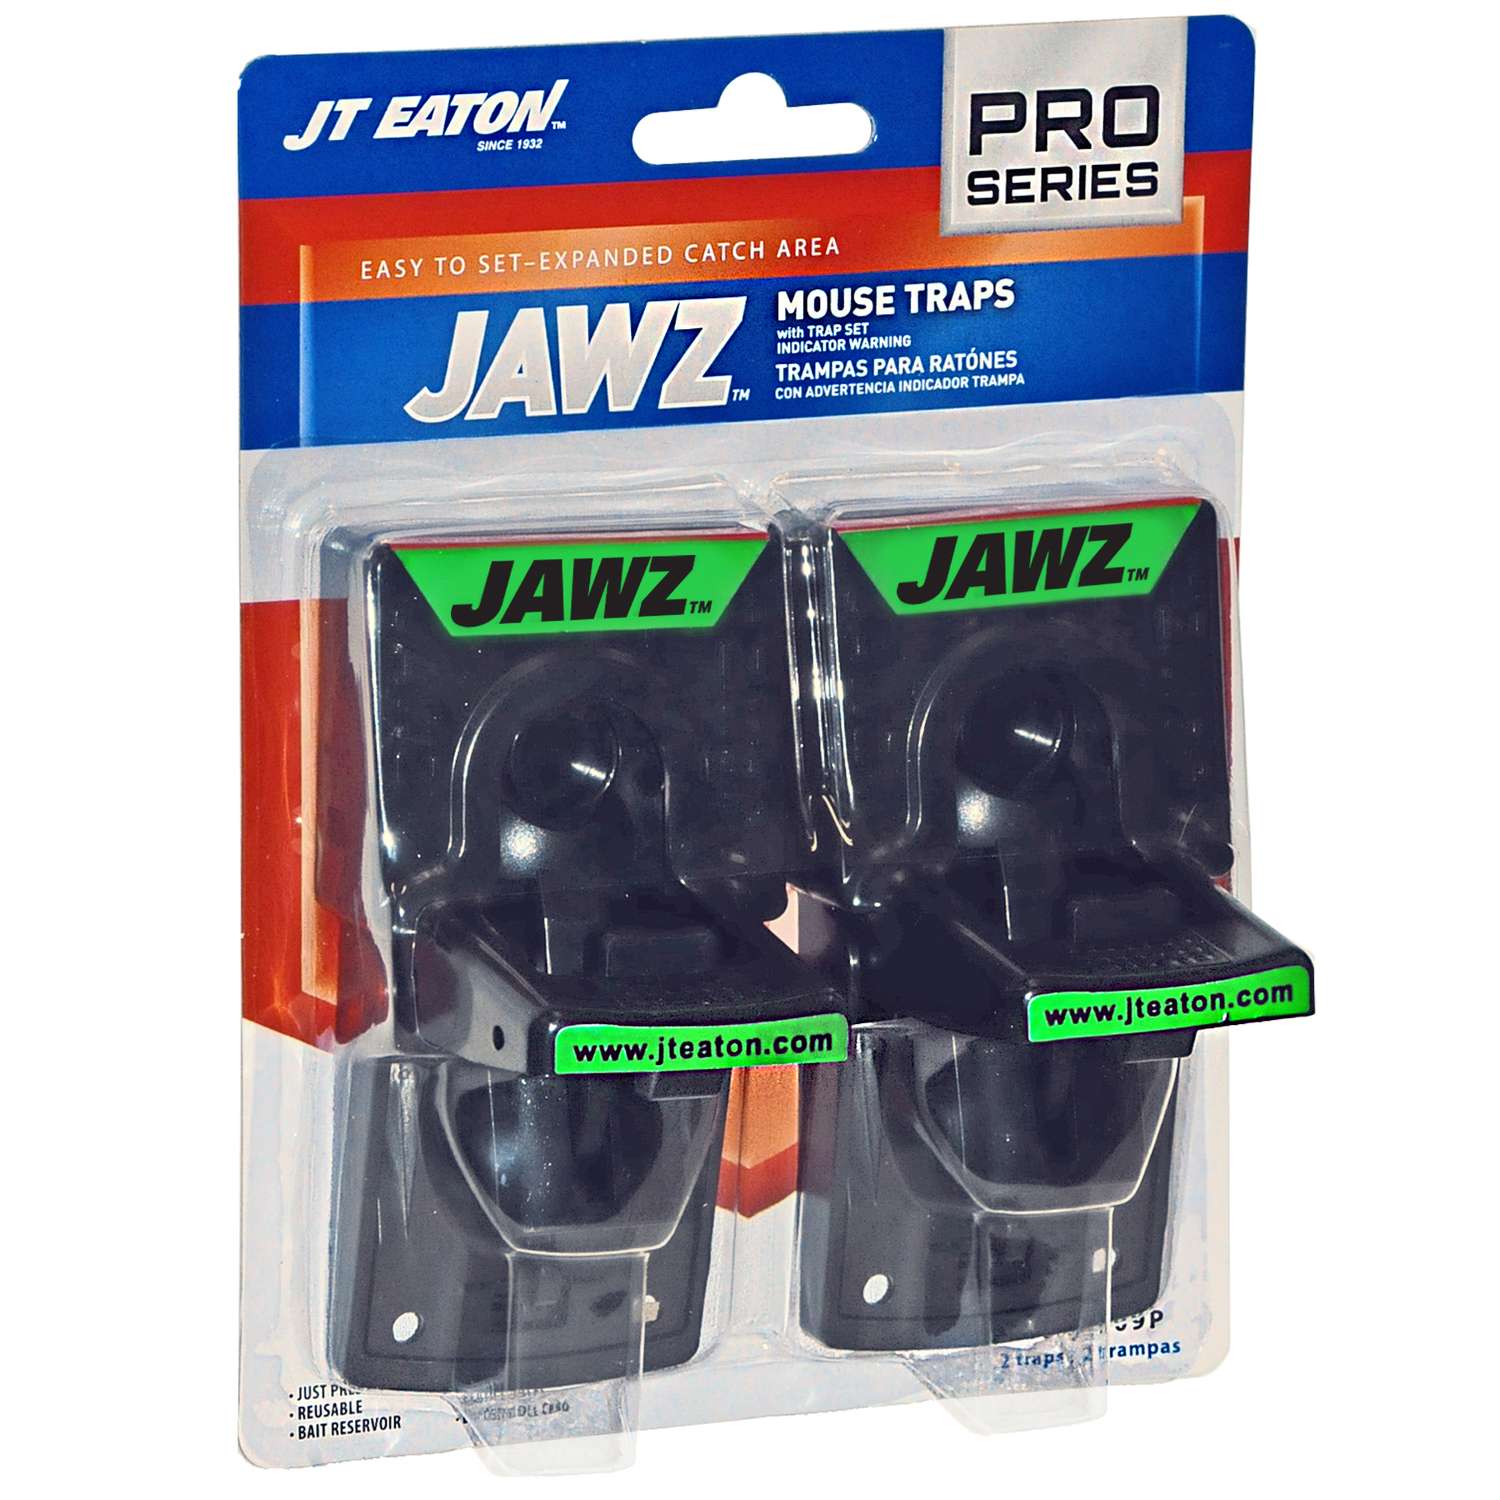 JT Eaton JAWZ Pro Series Small Snap Trap For Mice 2 pk - Ace Hardware